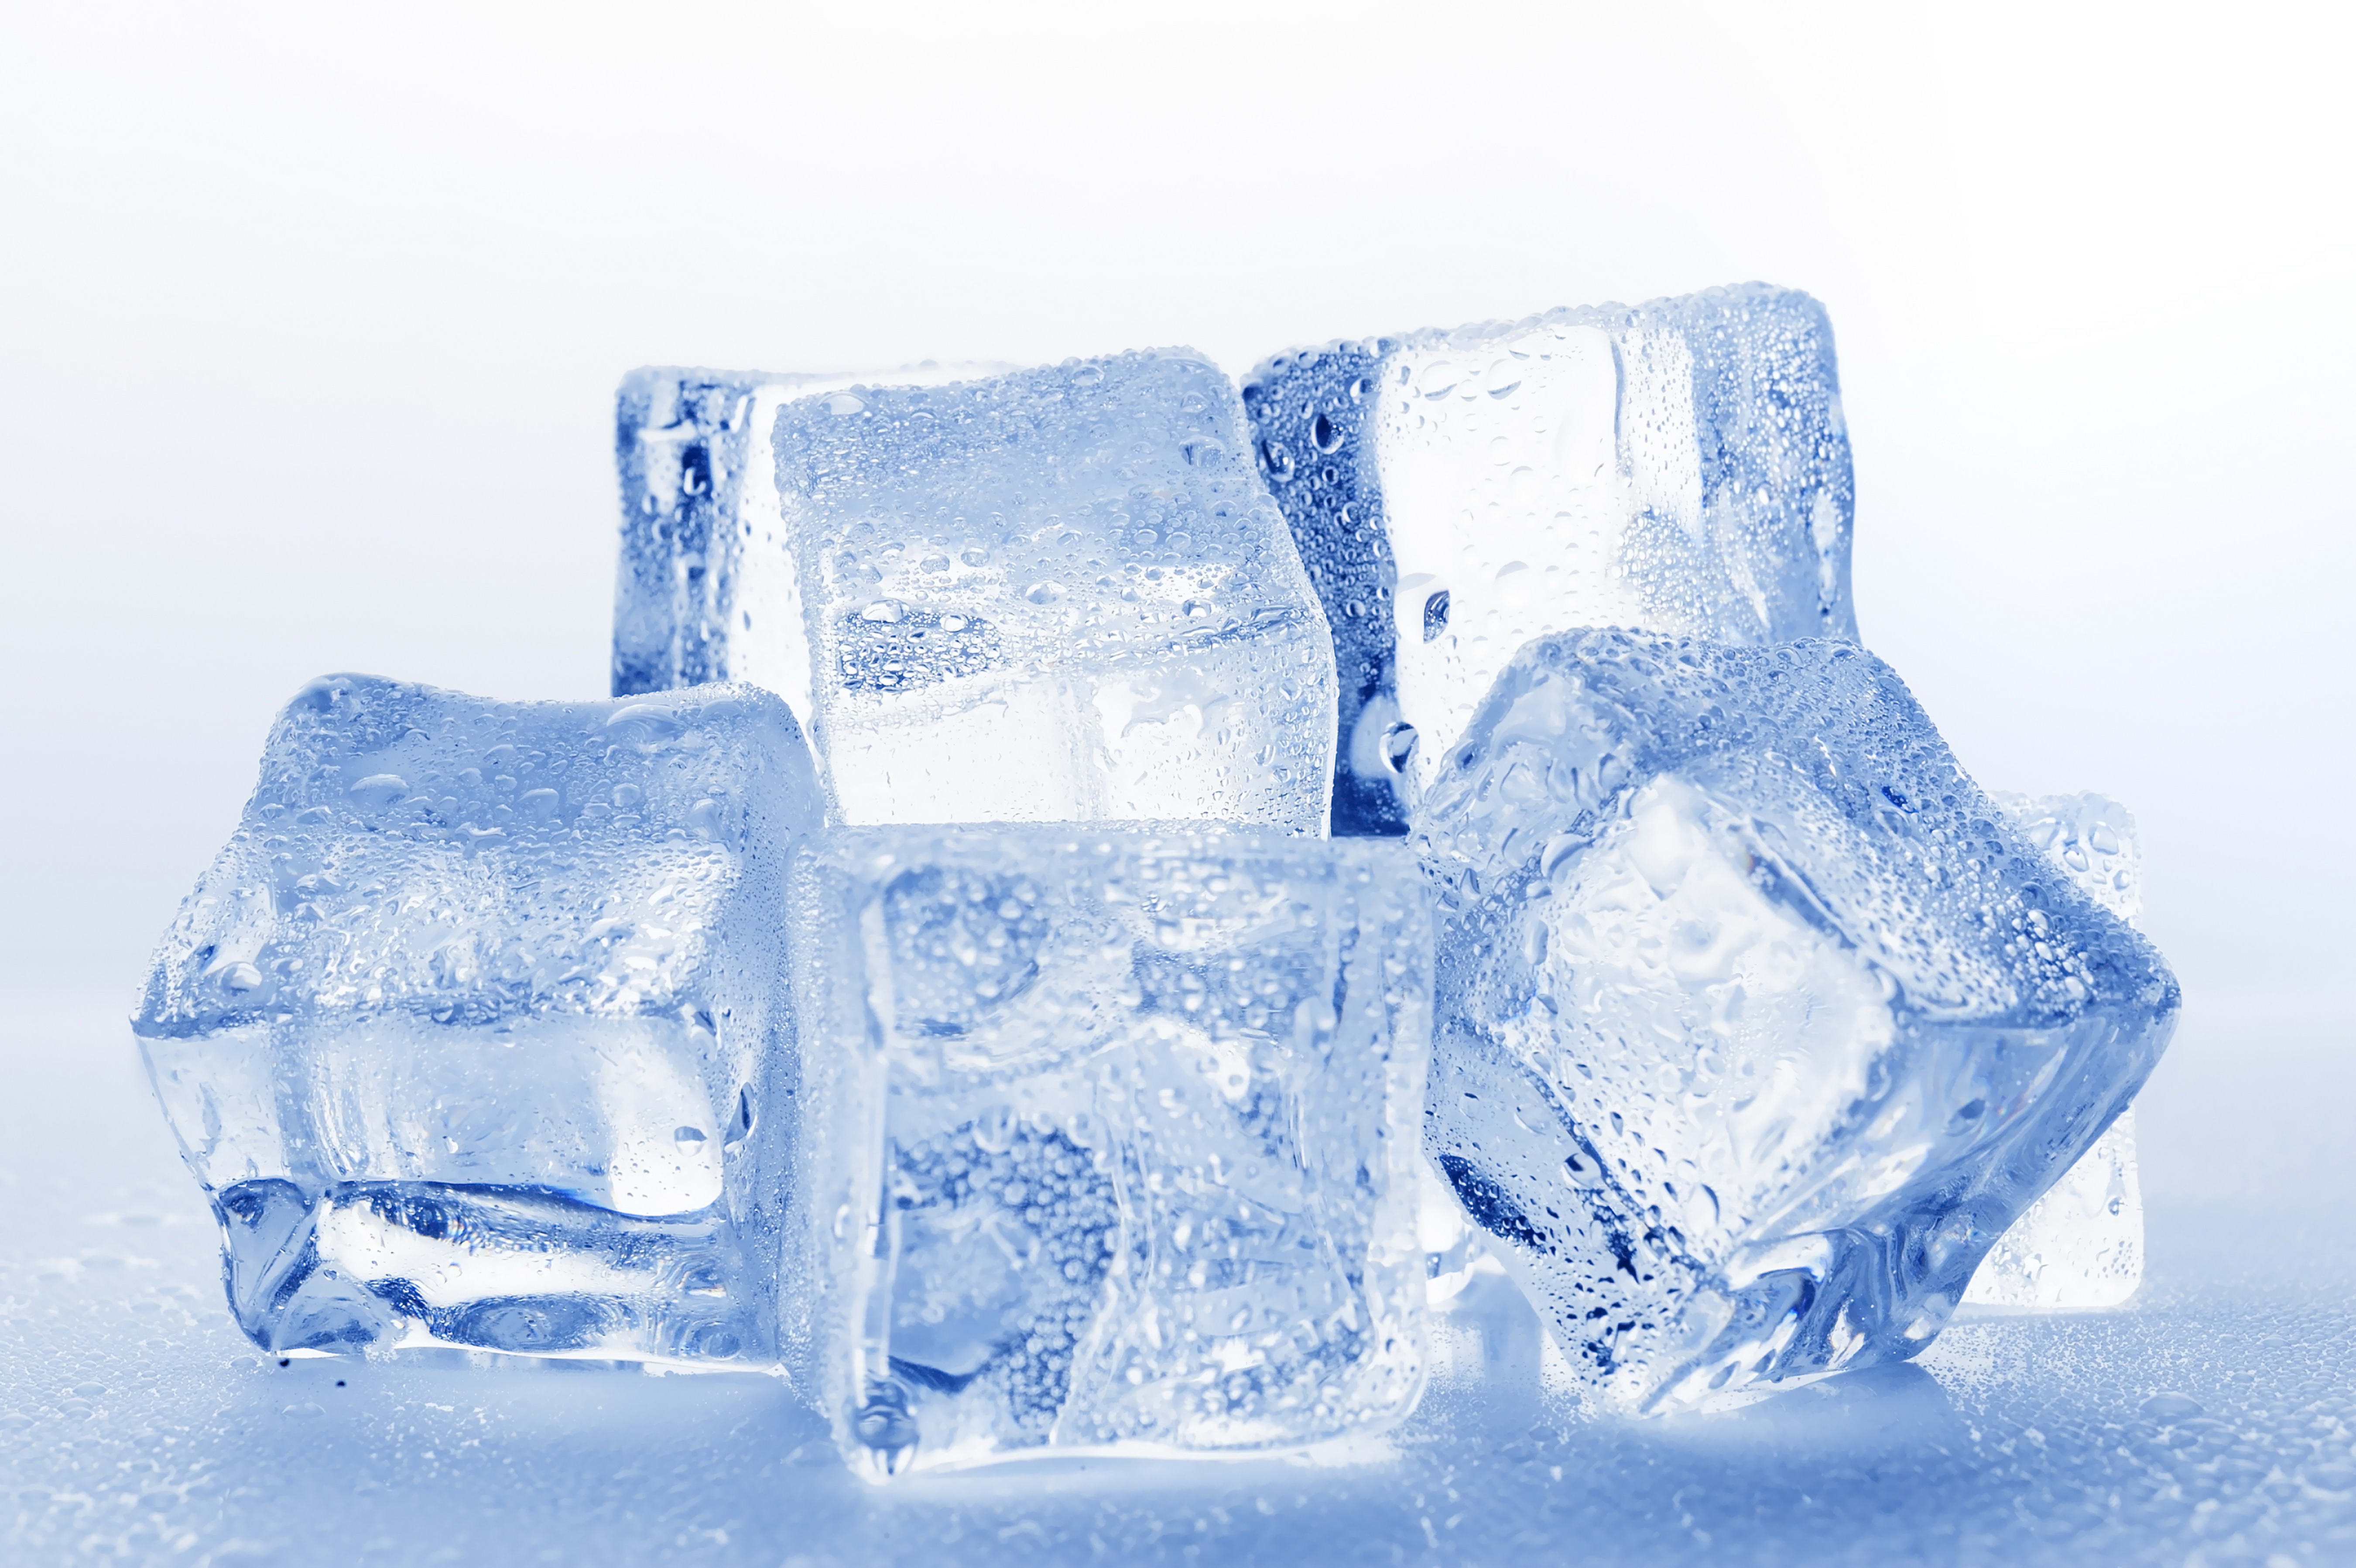 Ice images